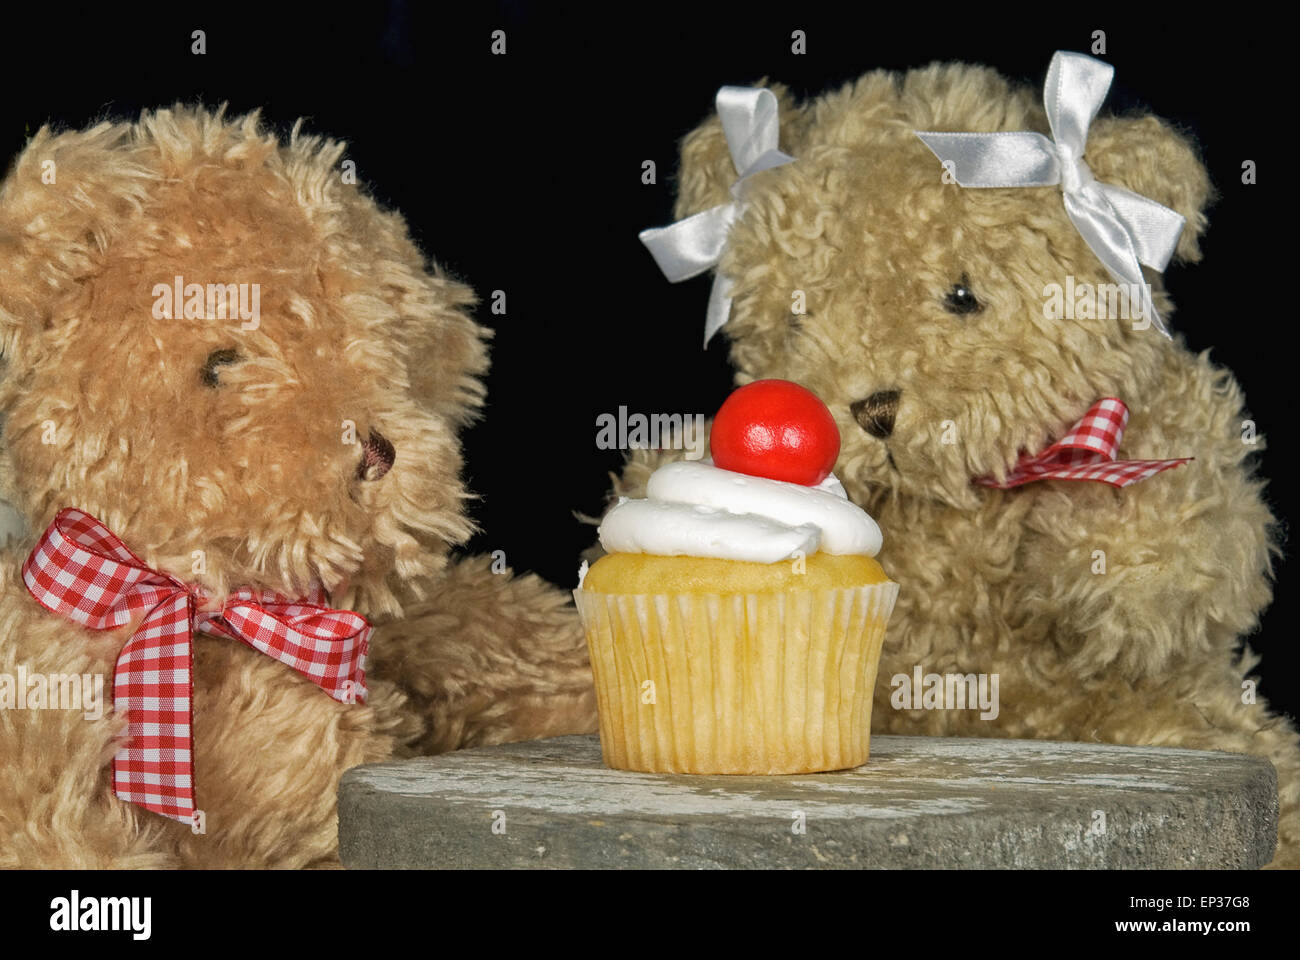 Pair of teddy bears with a gumball on cupcake. Stock Photo